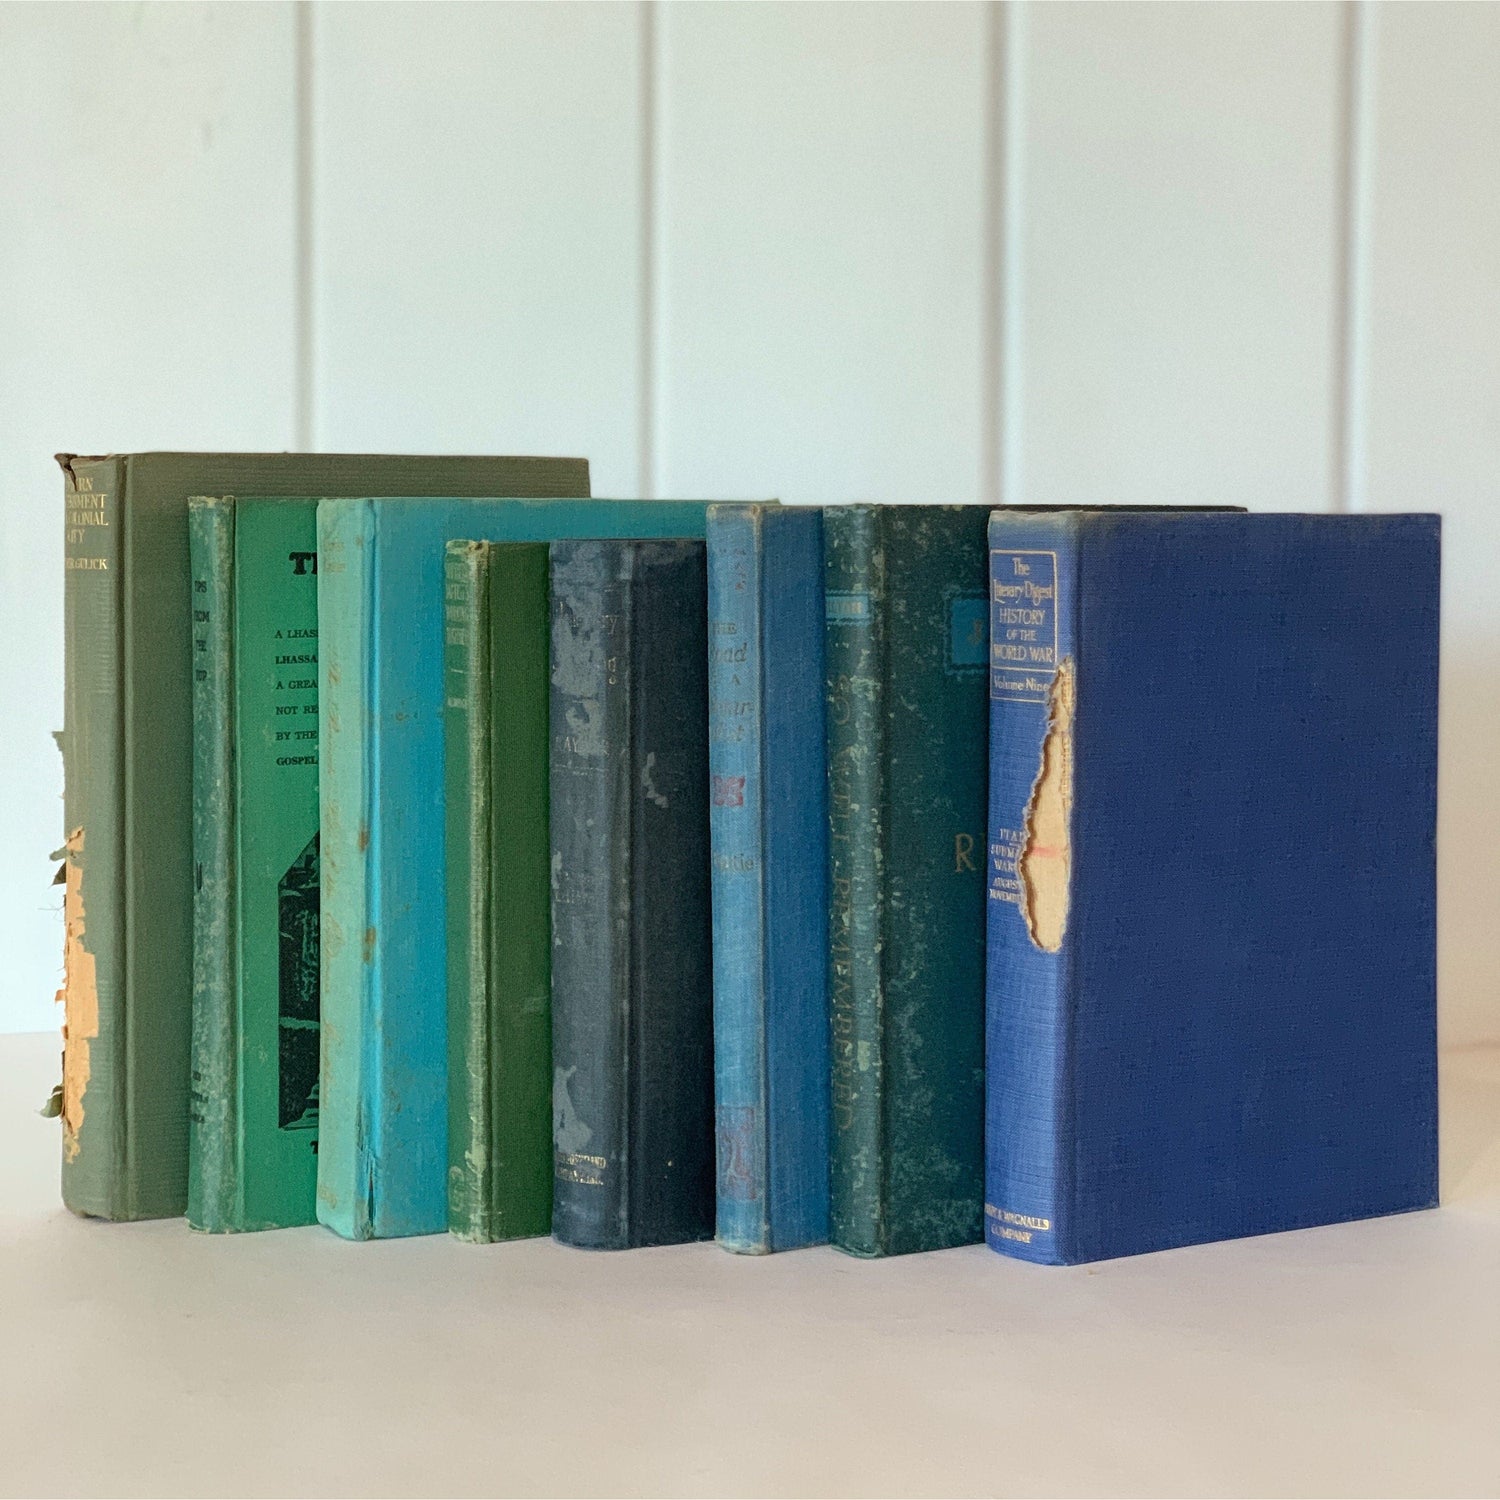 Antique Shabby Blue and Green Distressed Books for Display, Handmade Decor